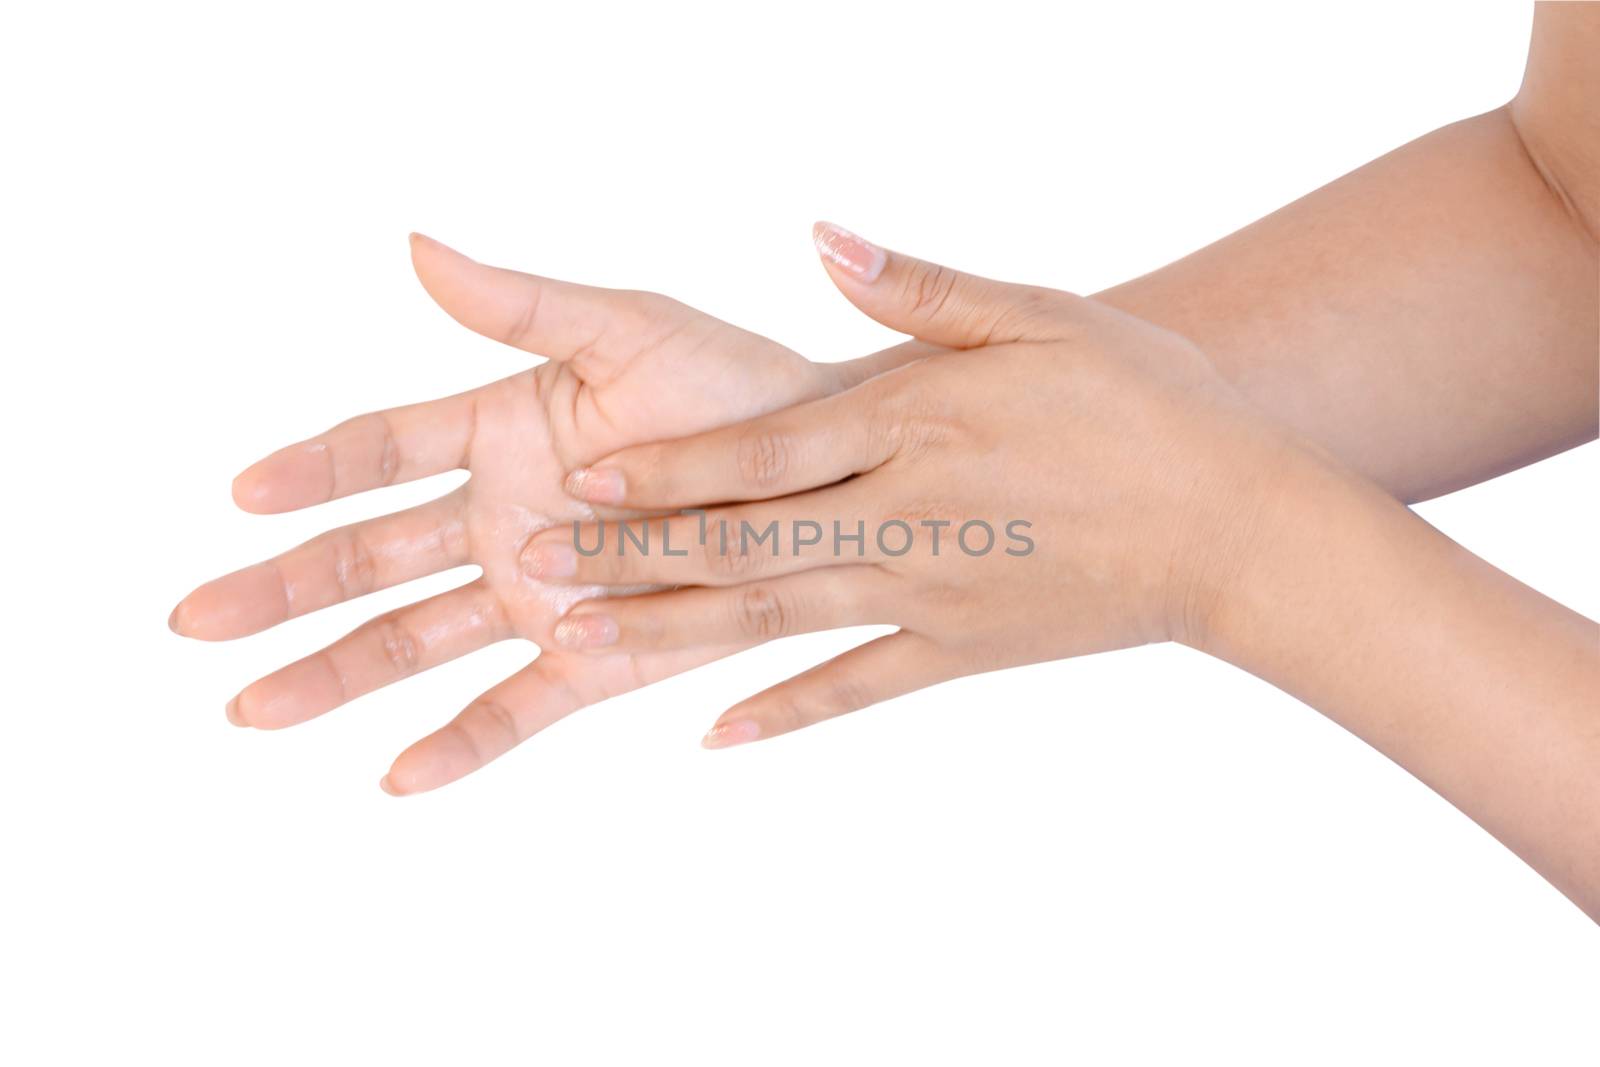 Closeup woman's hand washing with soap isolated on white background